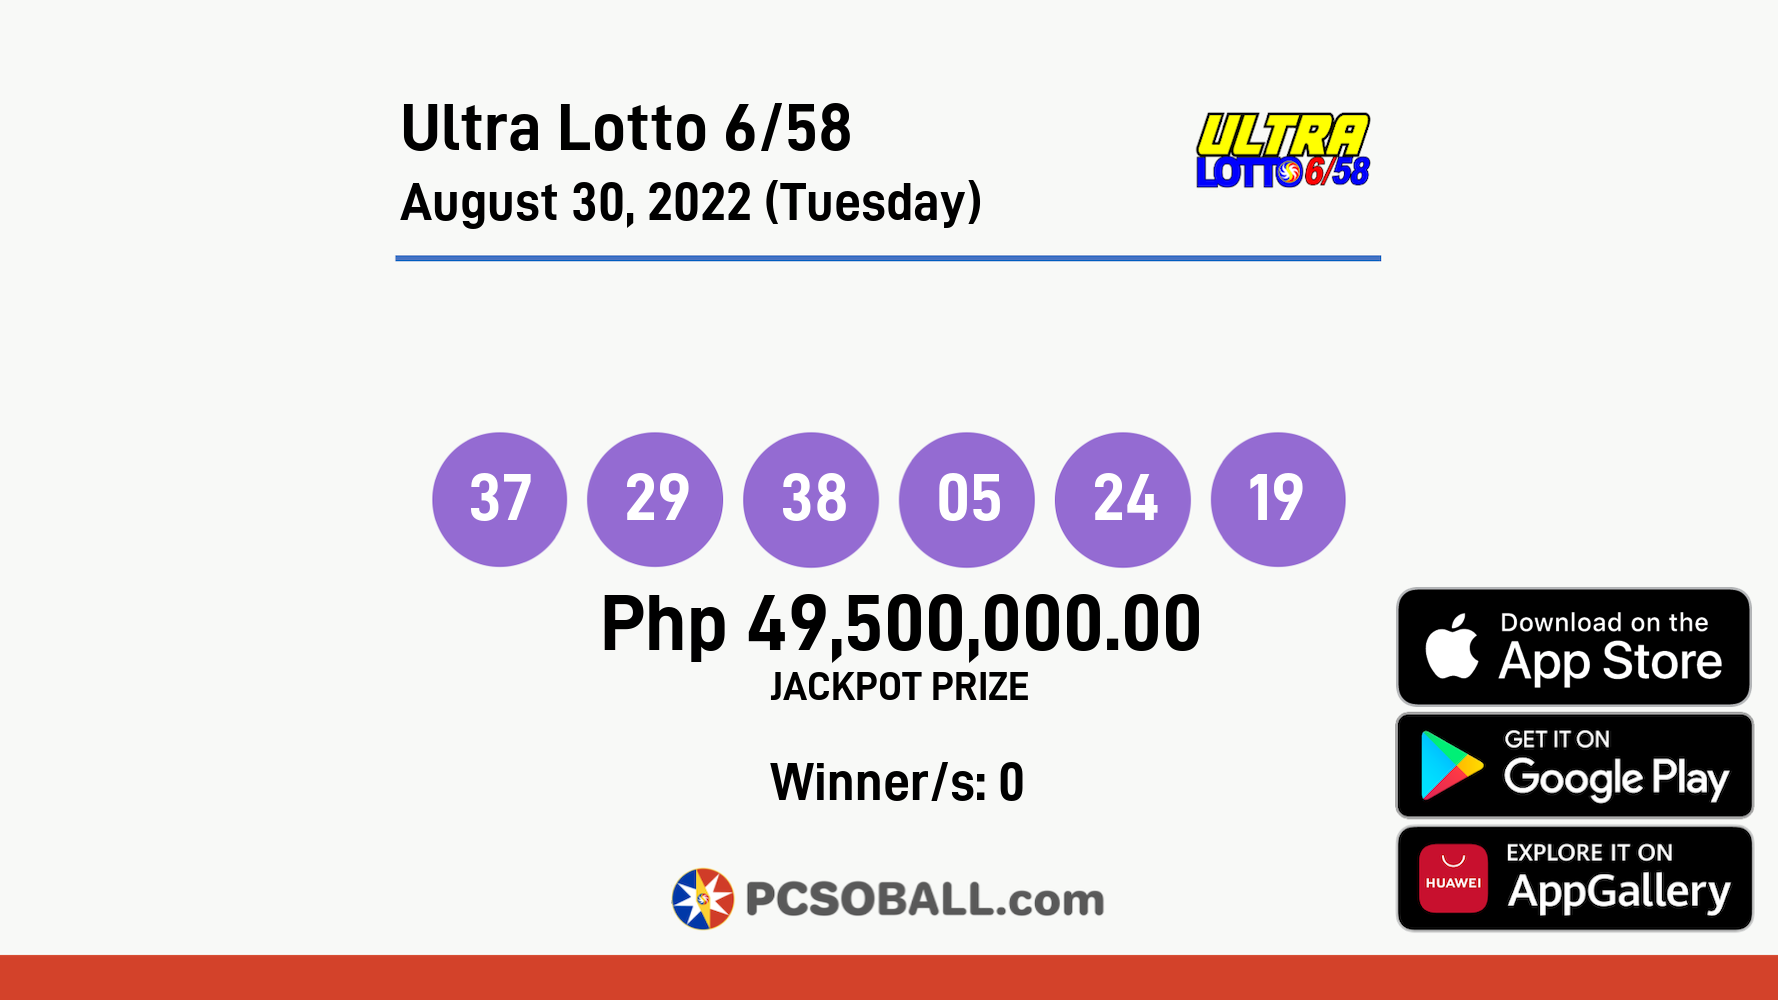 Ultra Lotto 6/58 August 30, 2022 (Tuesday) Result